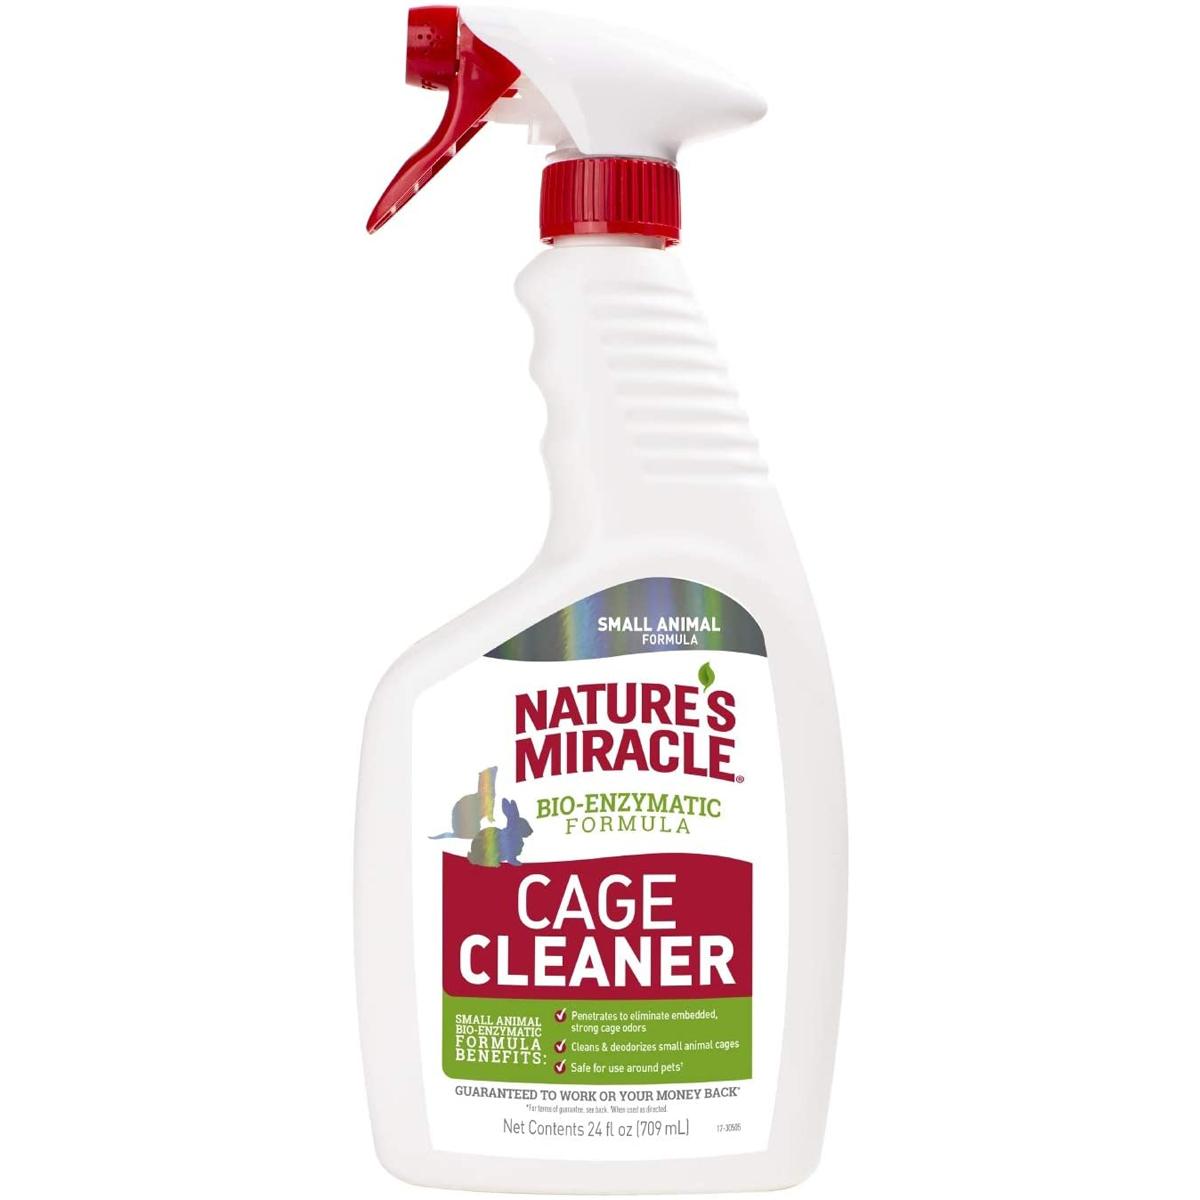 Natures Miracle Small Animal Cage Cleaner Spray for $3.35 Shipped